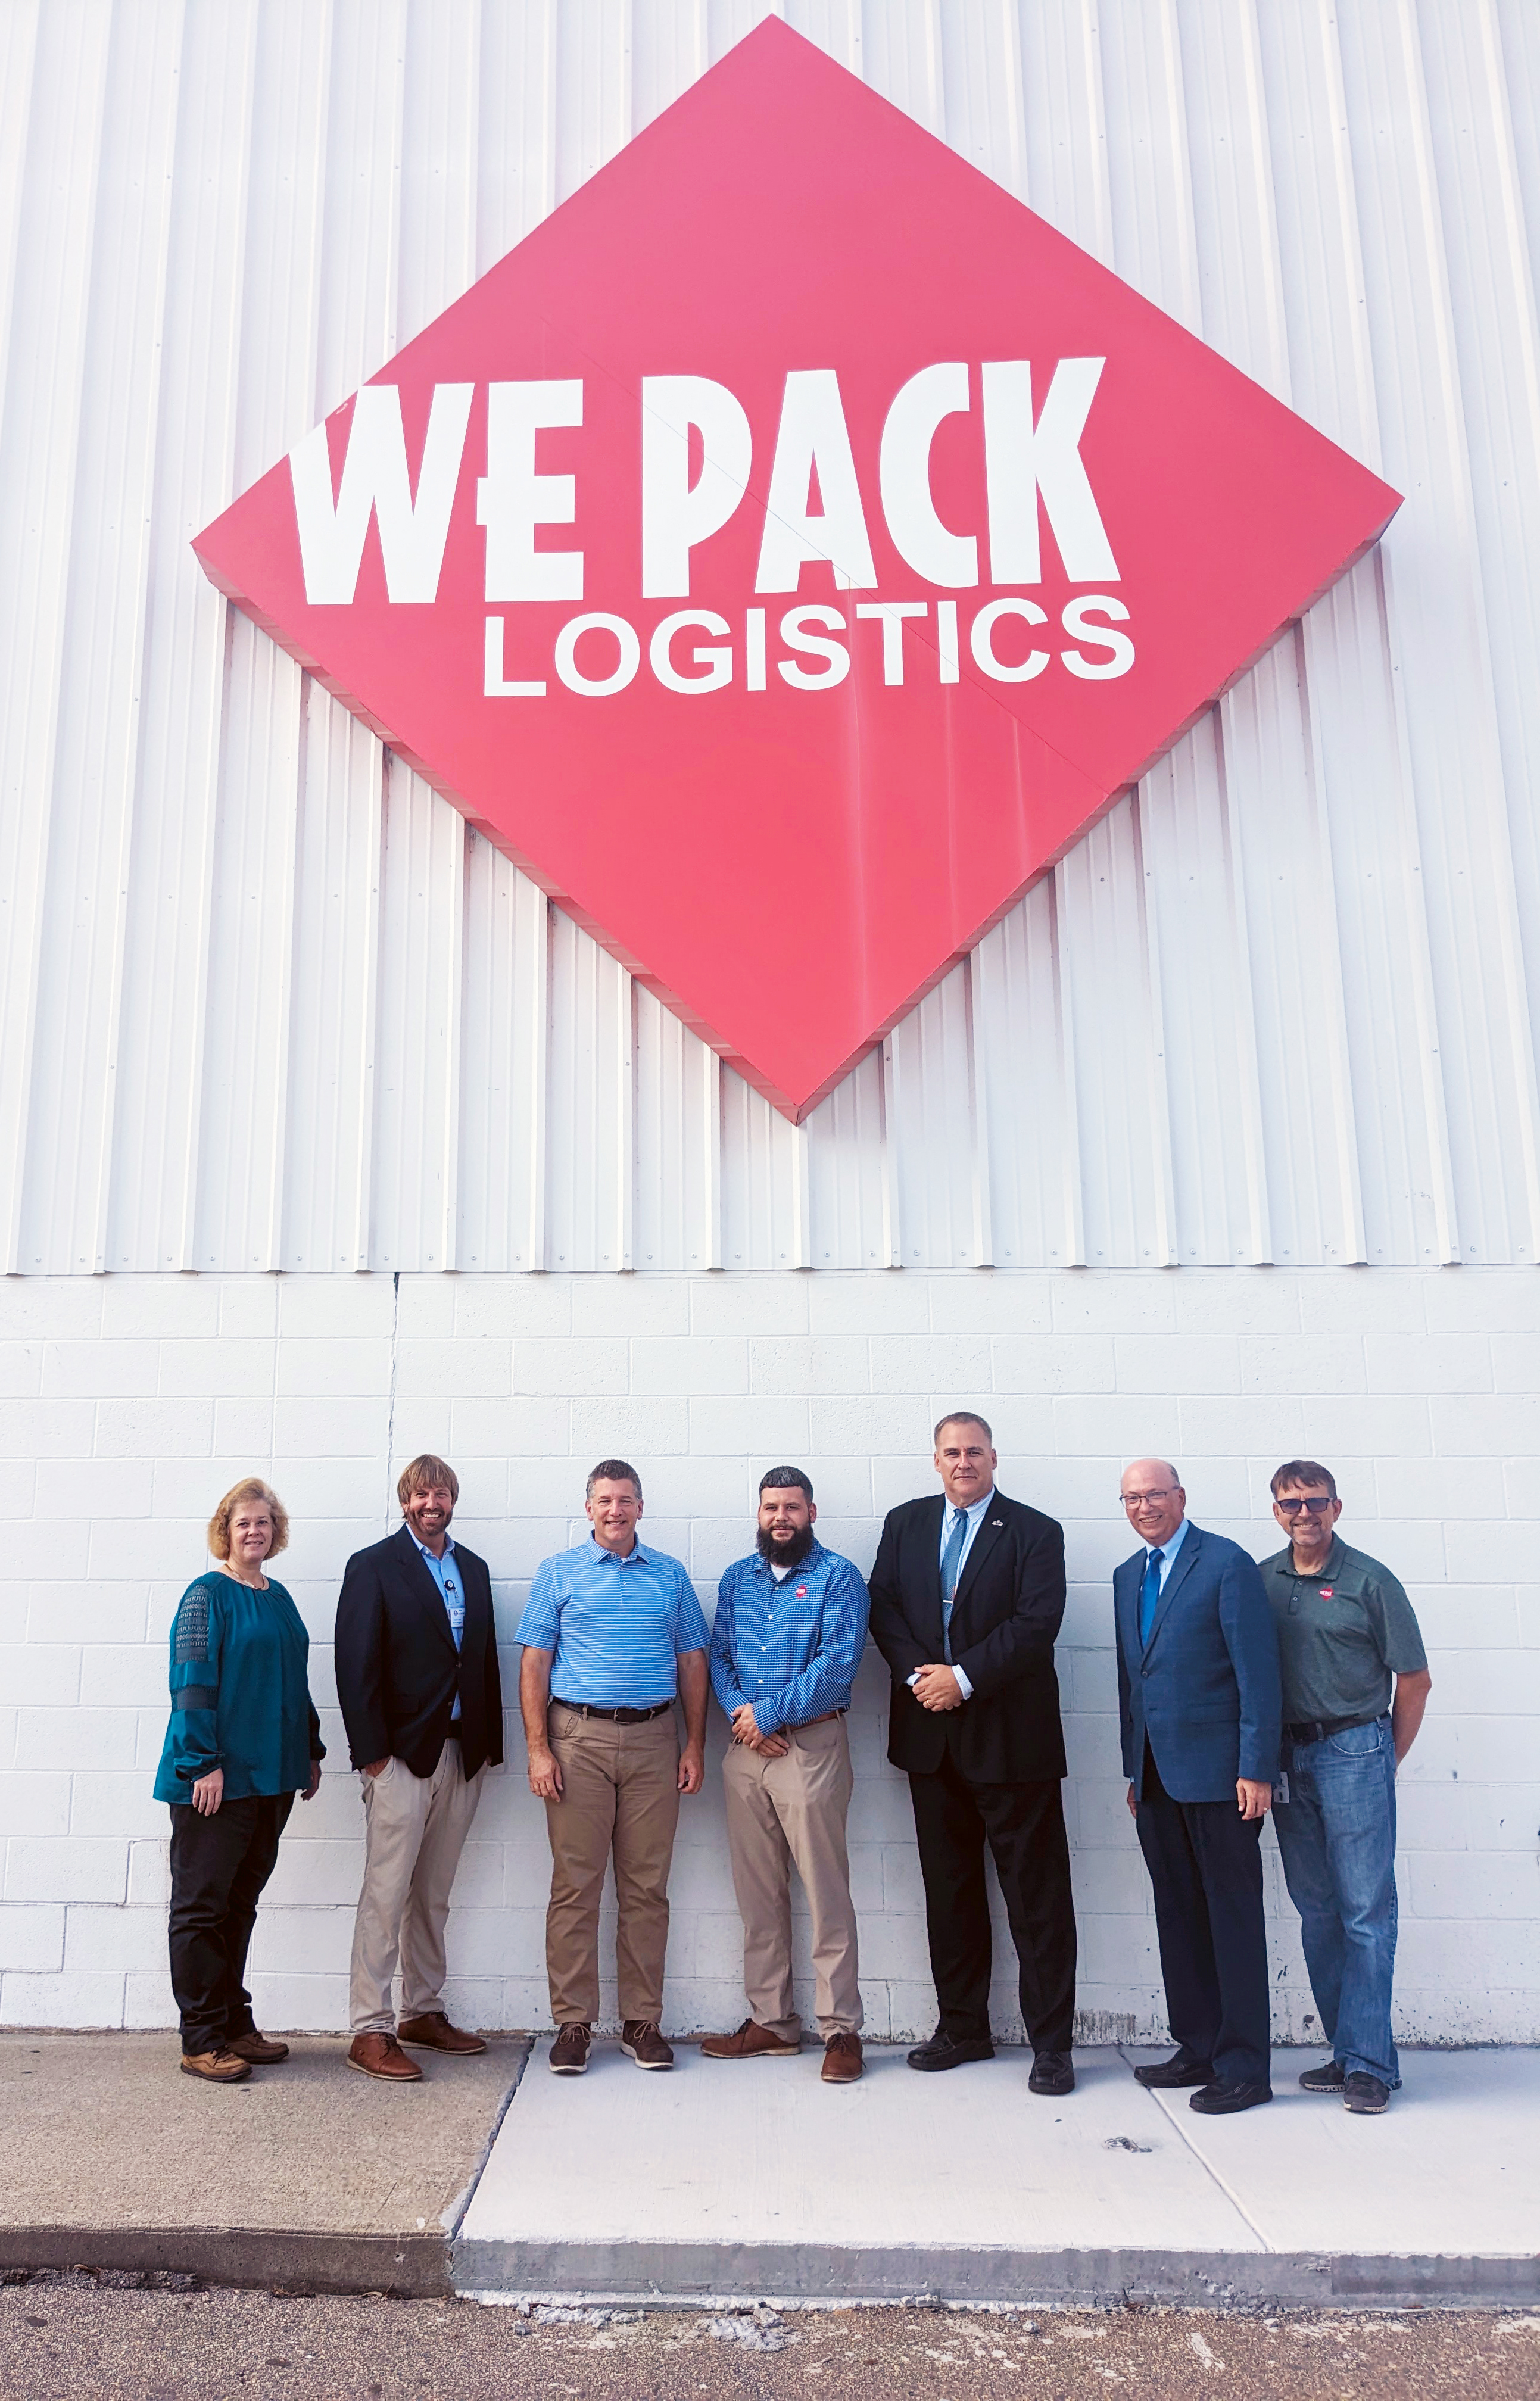 Group stands by We Pack Logistics sign